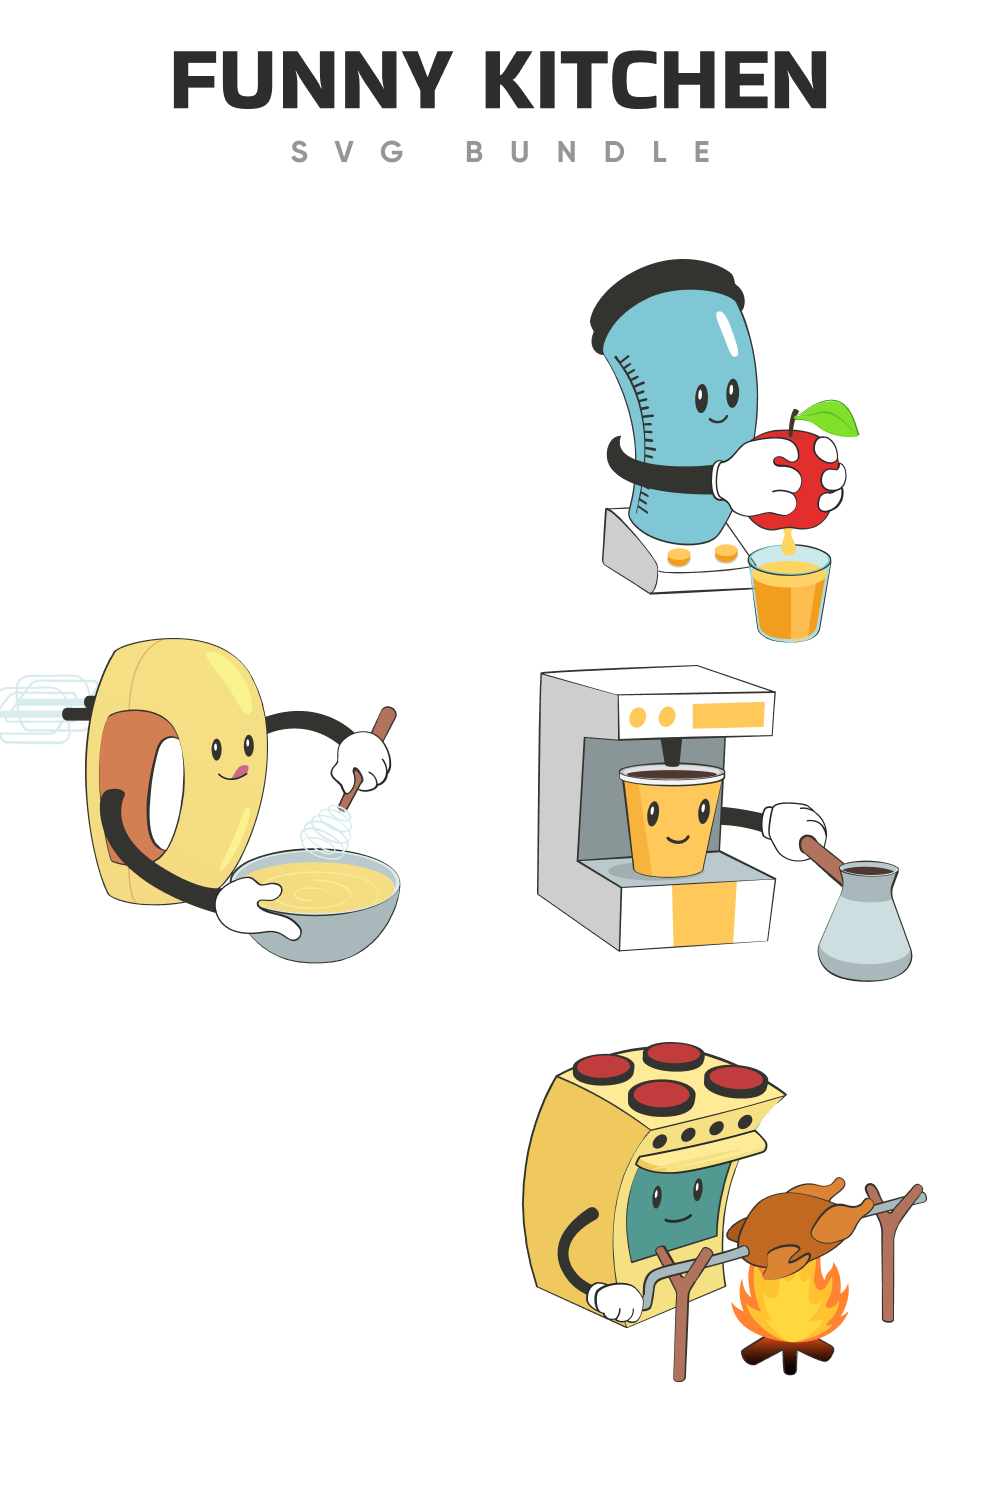 Colorful funny kitchen illustrations.